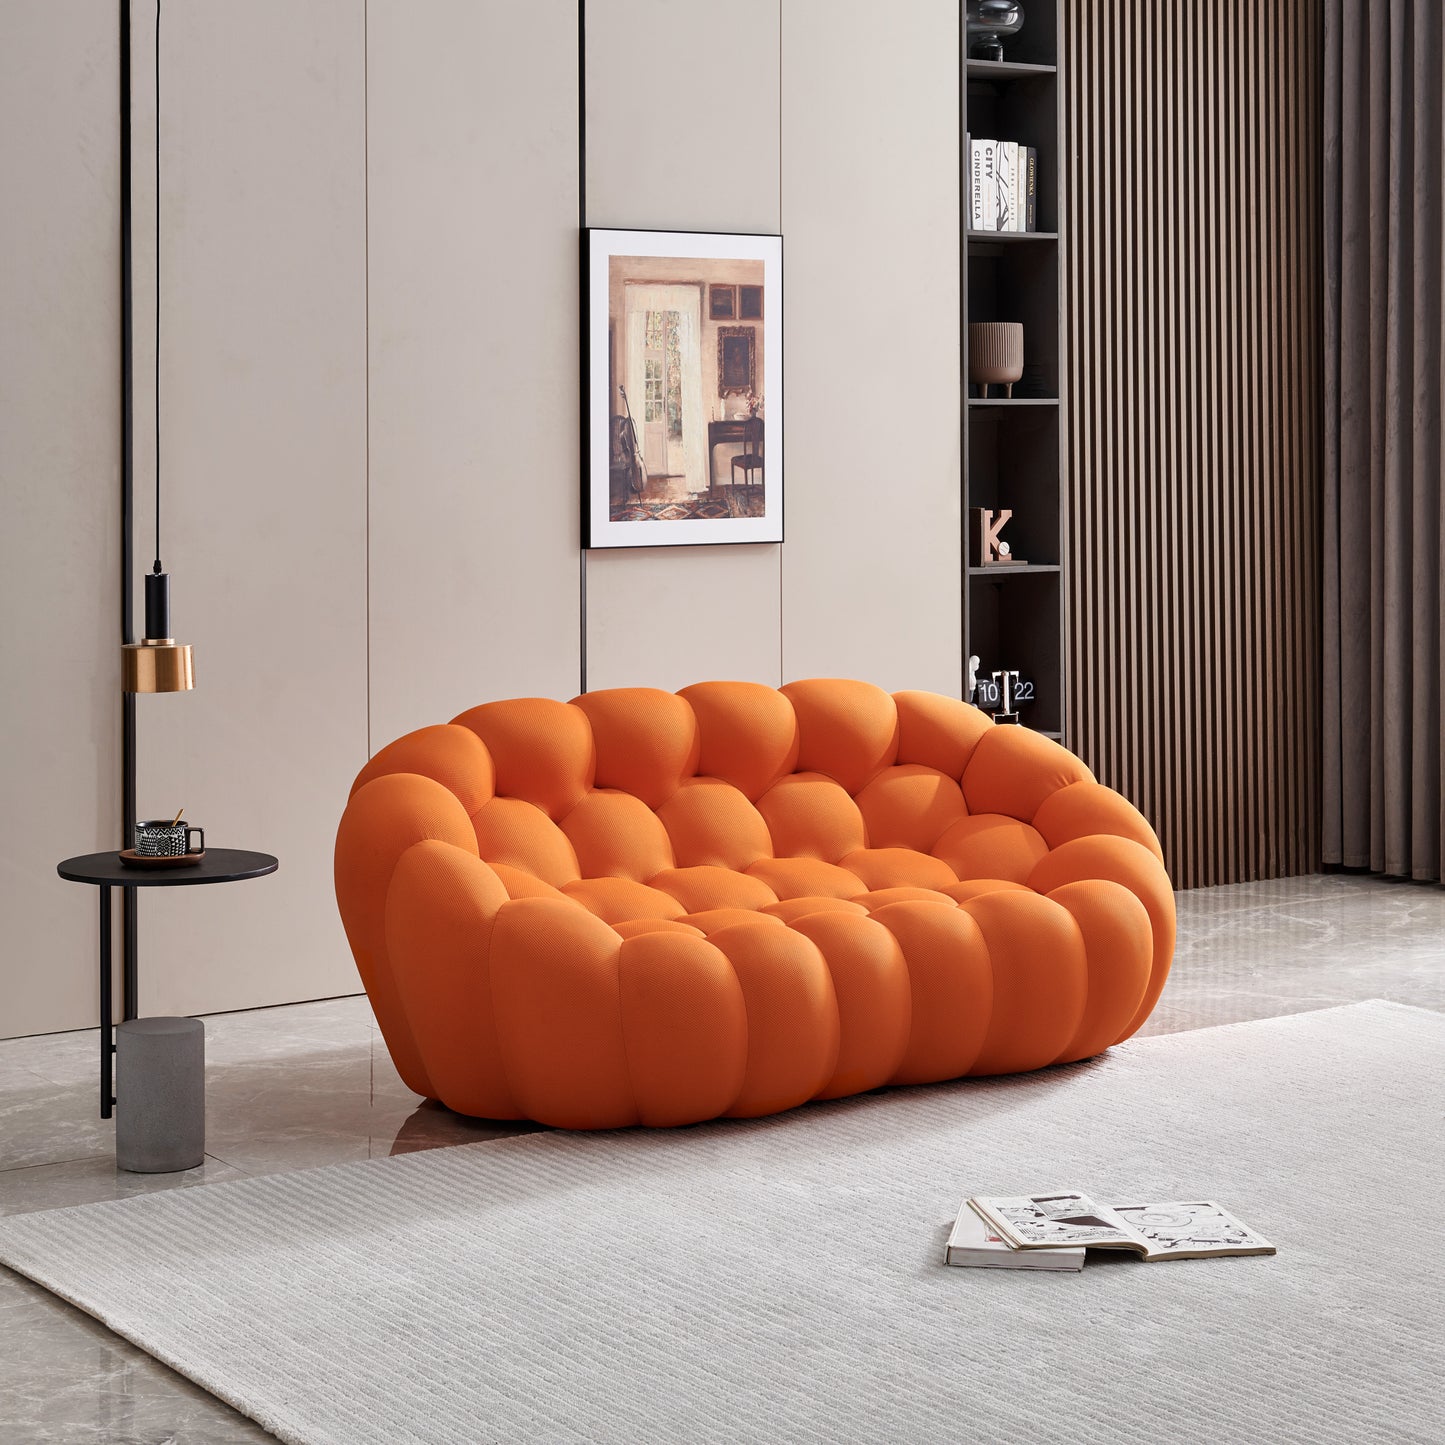 Styling foam whit mesh fabricleisure sofa,Floor oft,modern armless recliner with back,suitable for living room, apartment, bedroom and office.(Orange)